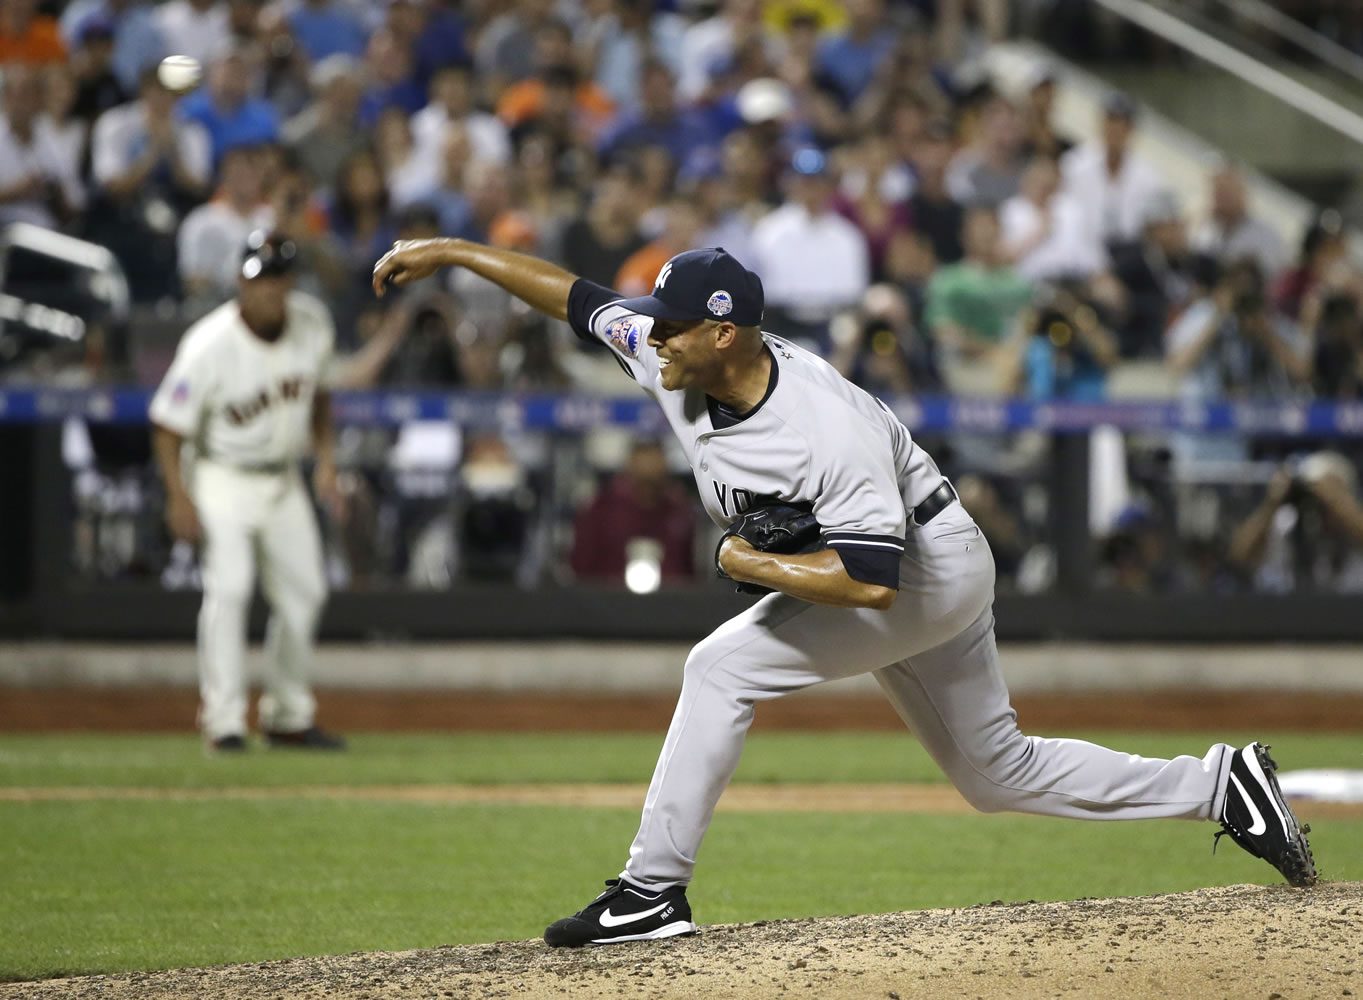 Mariano Rivera's inning of work was the highlight of Tuesday's All-Star Game in New York.